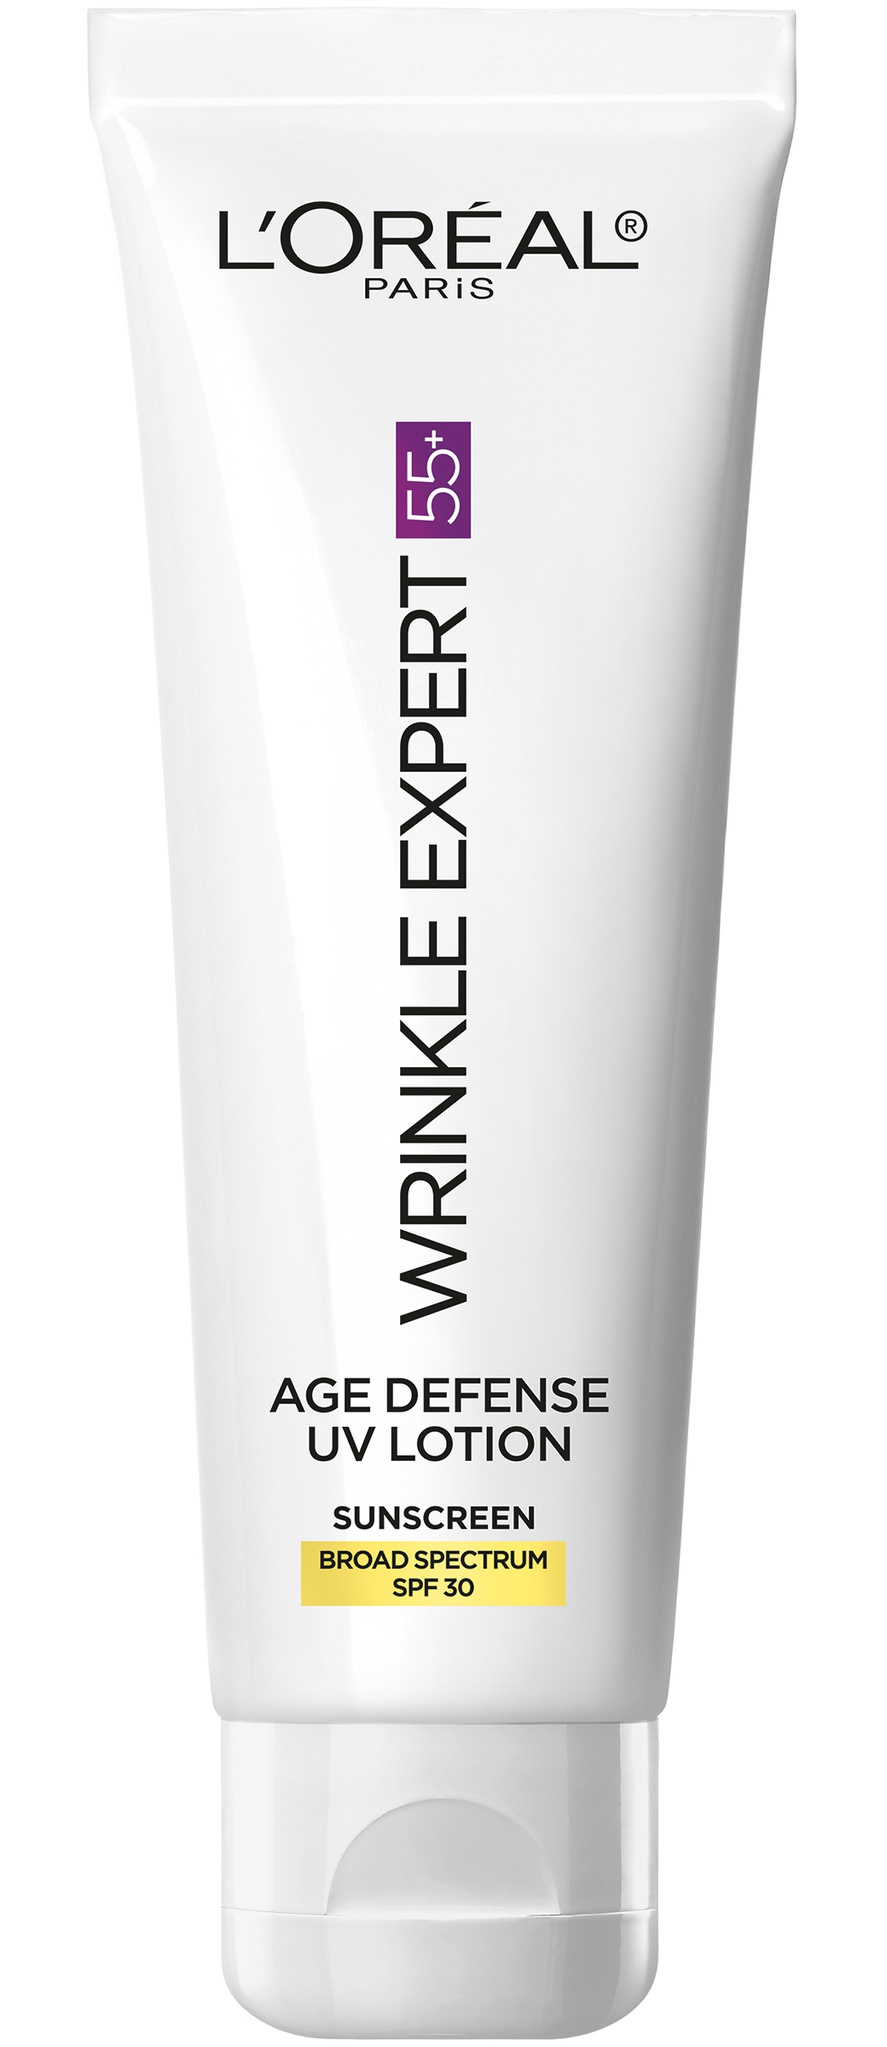 L'Oreal Wrinkle Expert 55+ Age Defense Lotion SPF